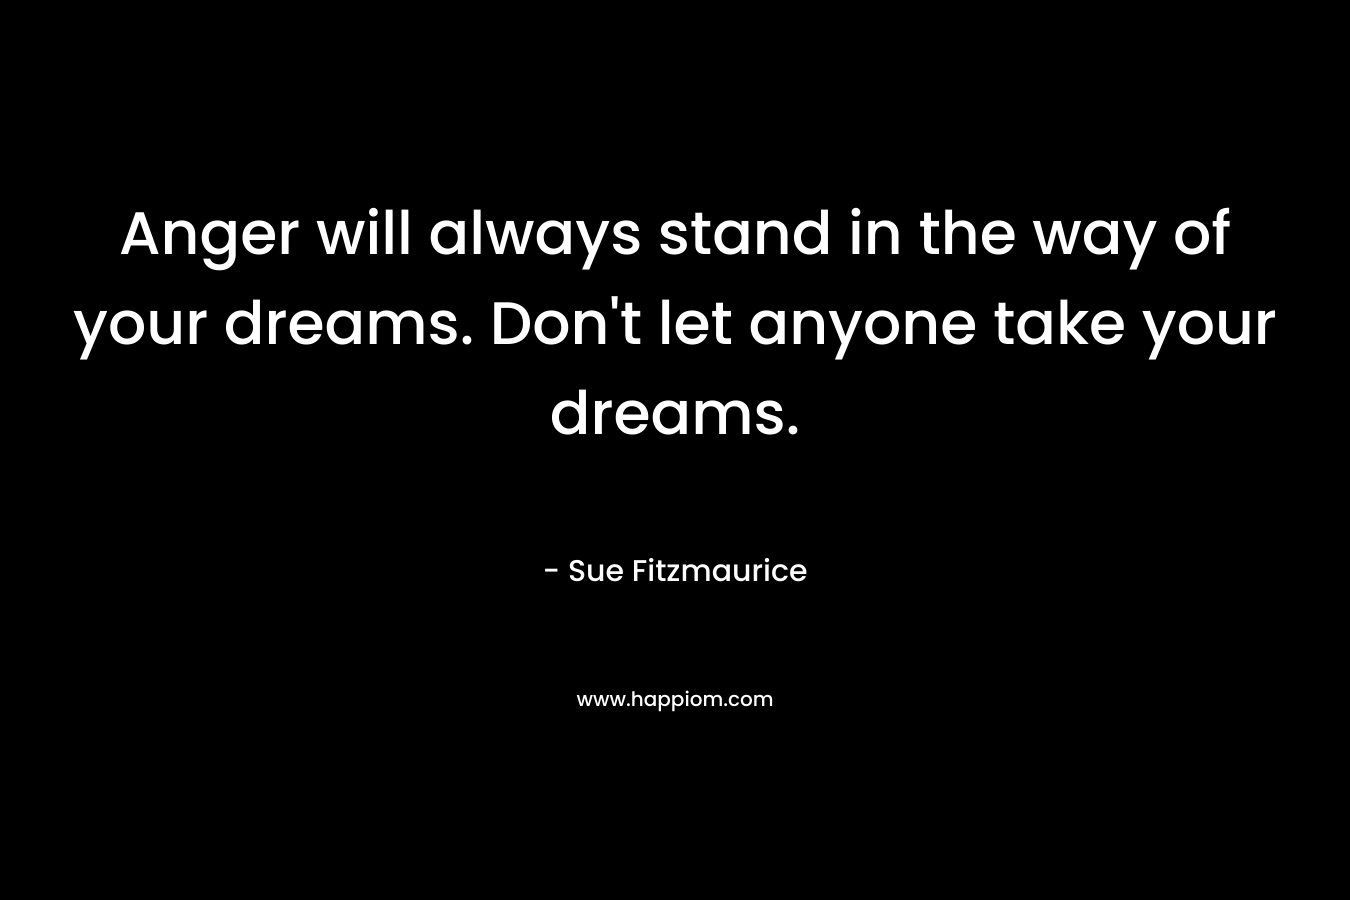 Anger will always stand in the way of your dreams. Don't let anyone take your dreams.